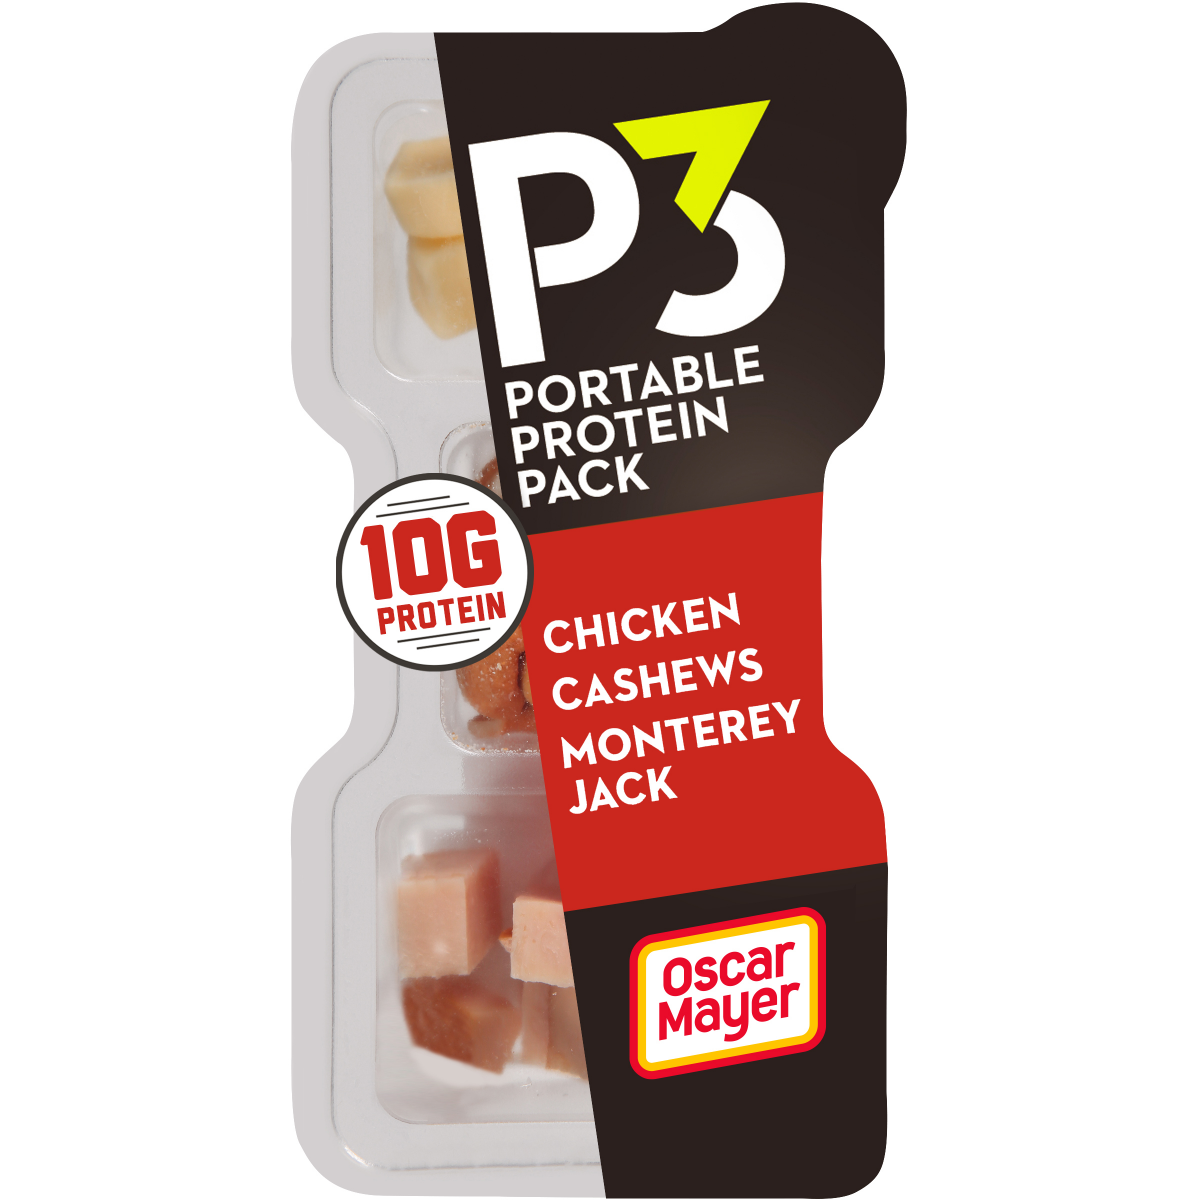 slide 1 of 4, P3 Portable Protein Snack Pack with Chicken, Cashews & Monterey Jack Cheese, 2 oz Tray, 